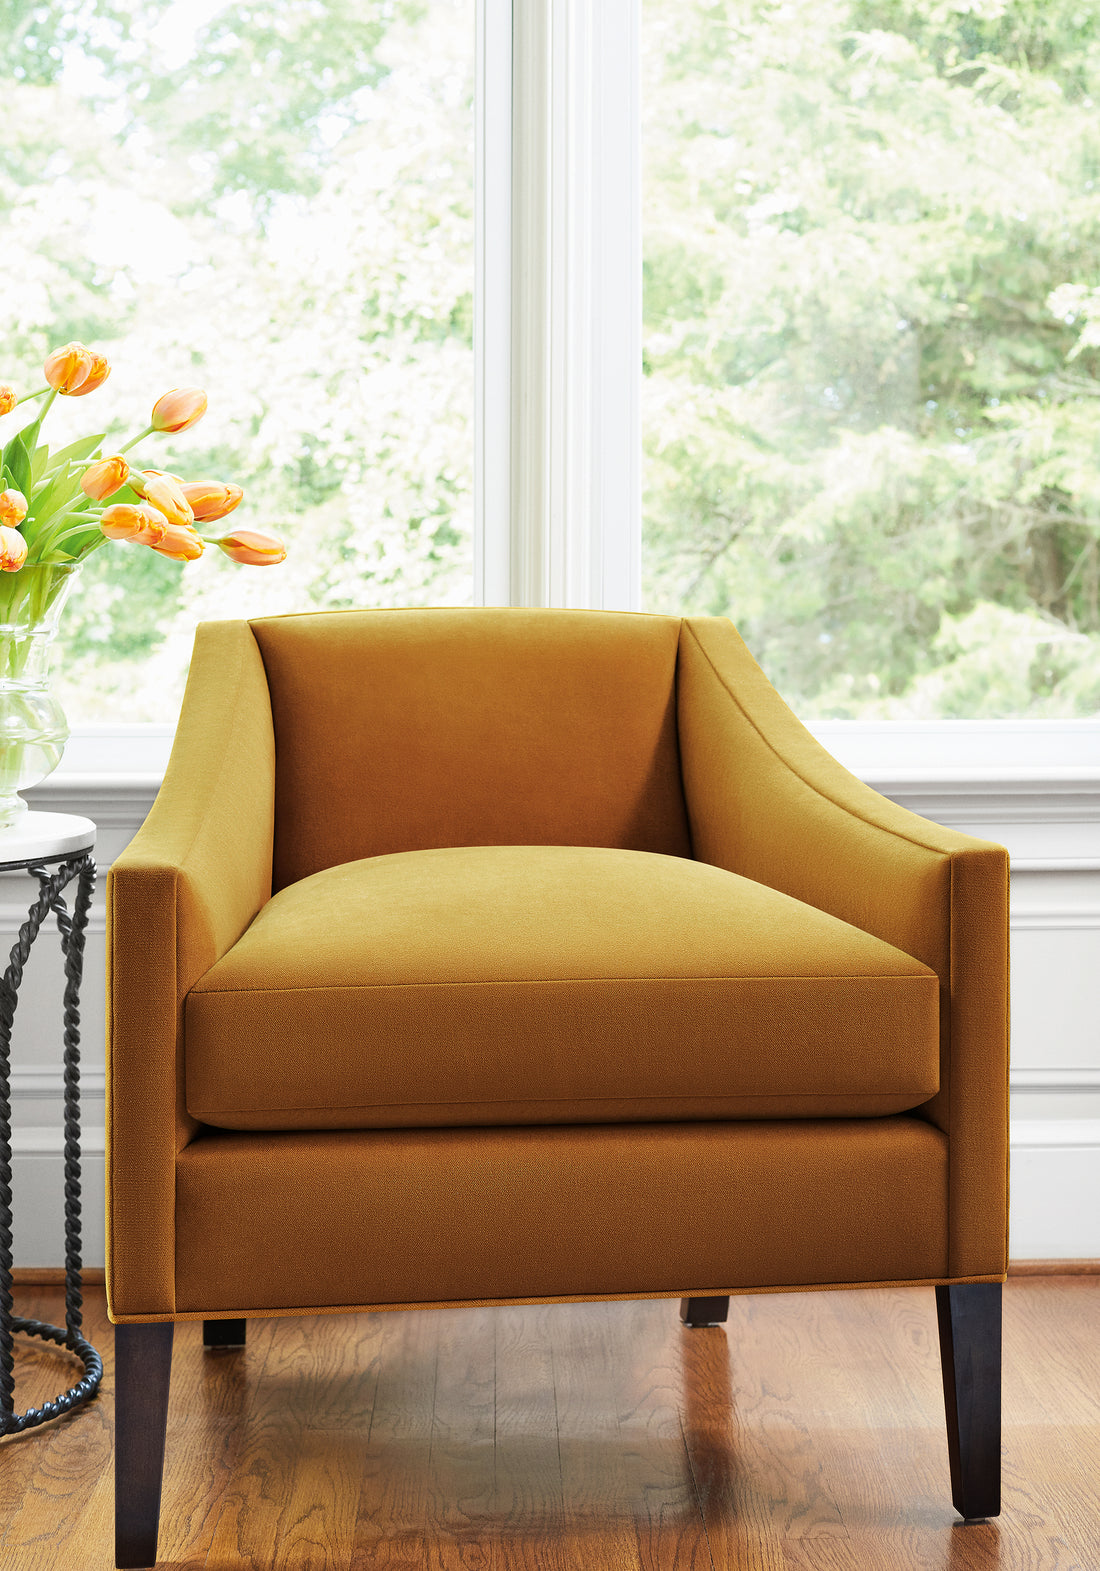 Grayson Chair in Club Velvet sustainable woven fabric in amber color - pattern number W7200 by Thibaut in the Club Velvet collection